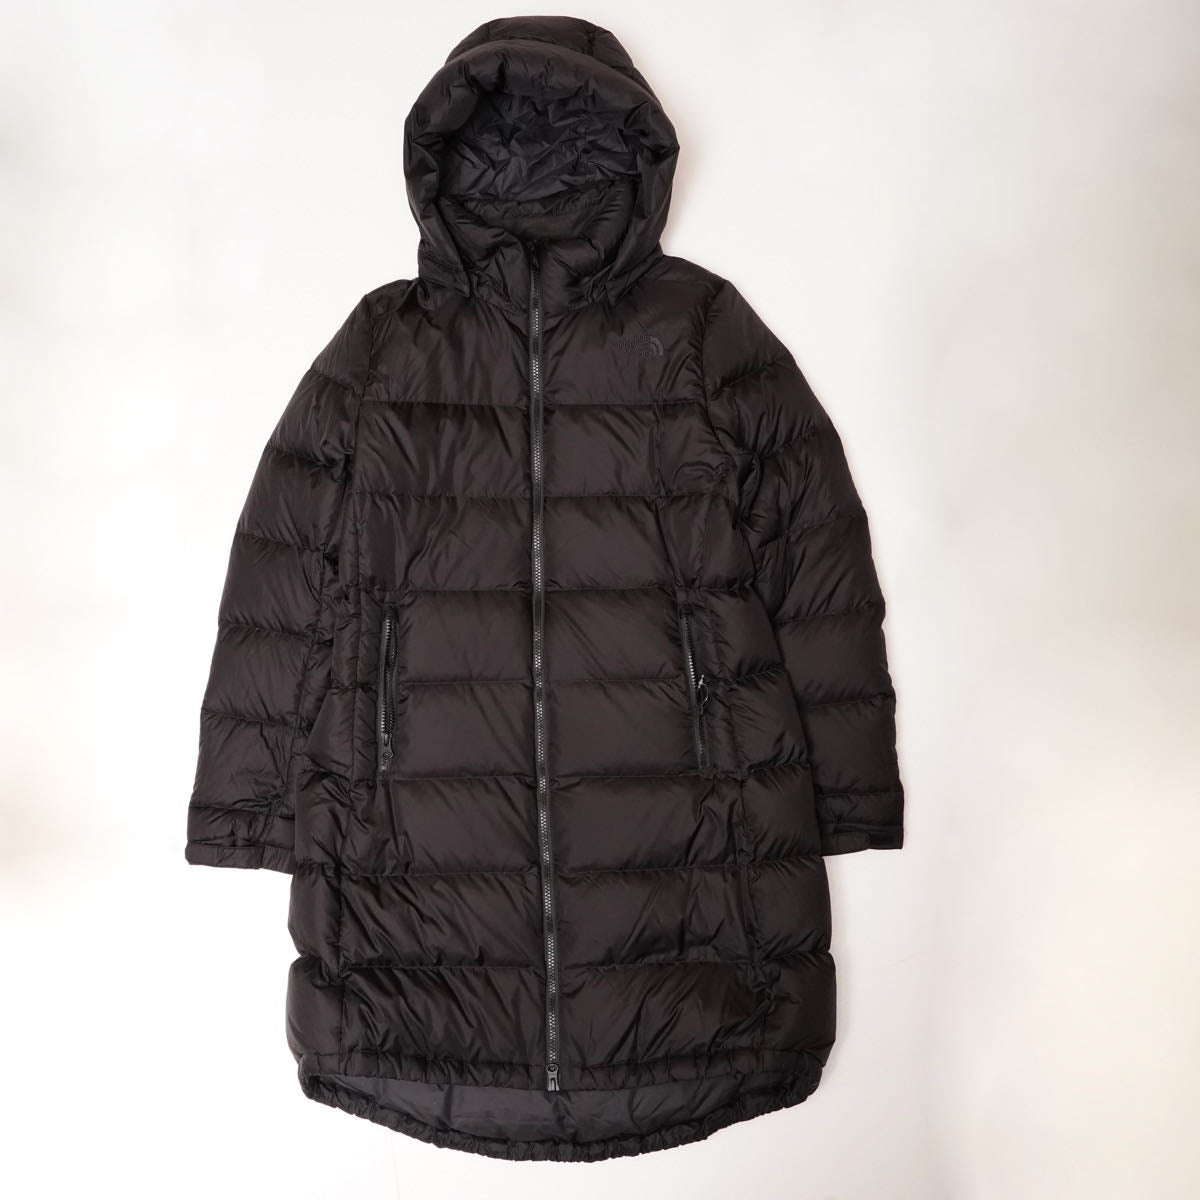 【WOMEN】The North Face Black Down Coat